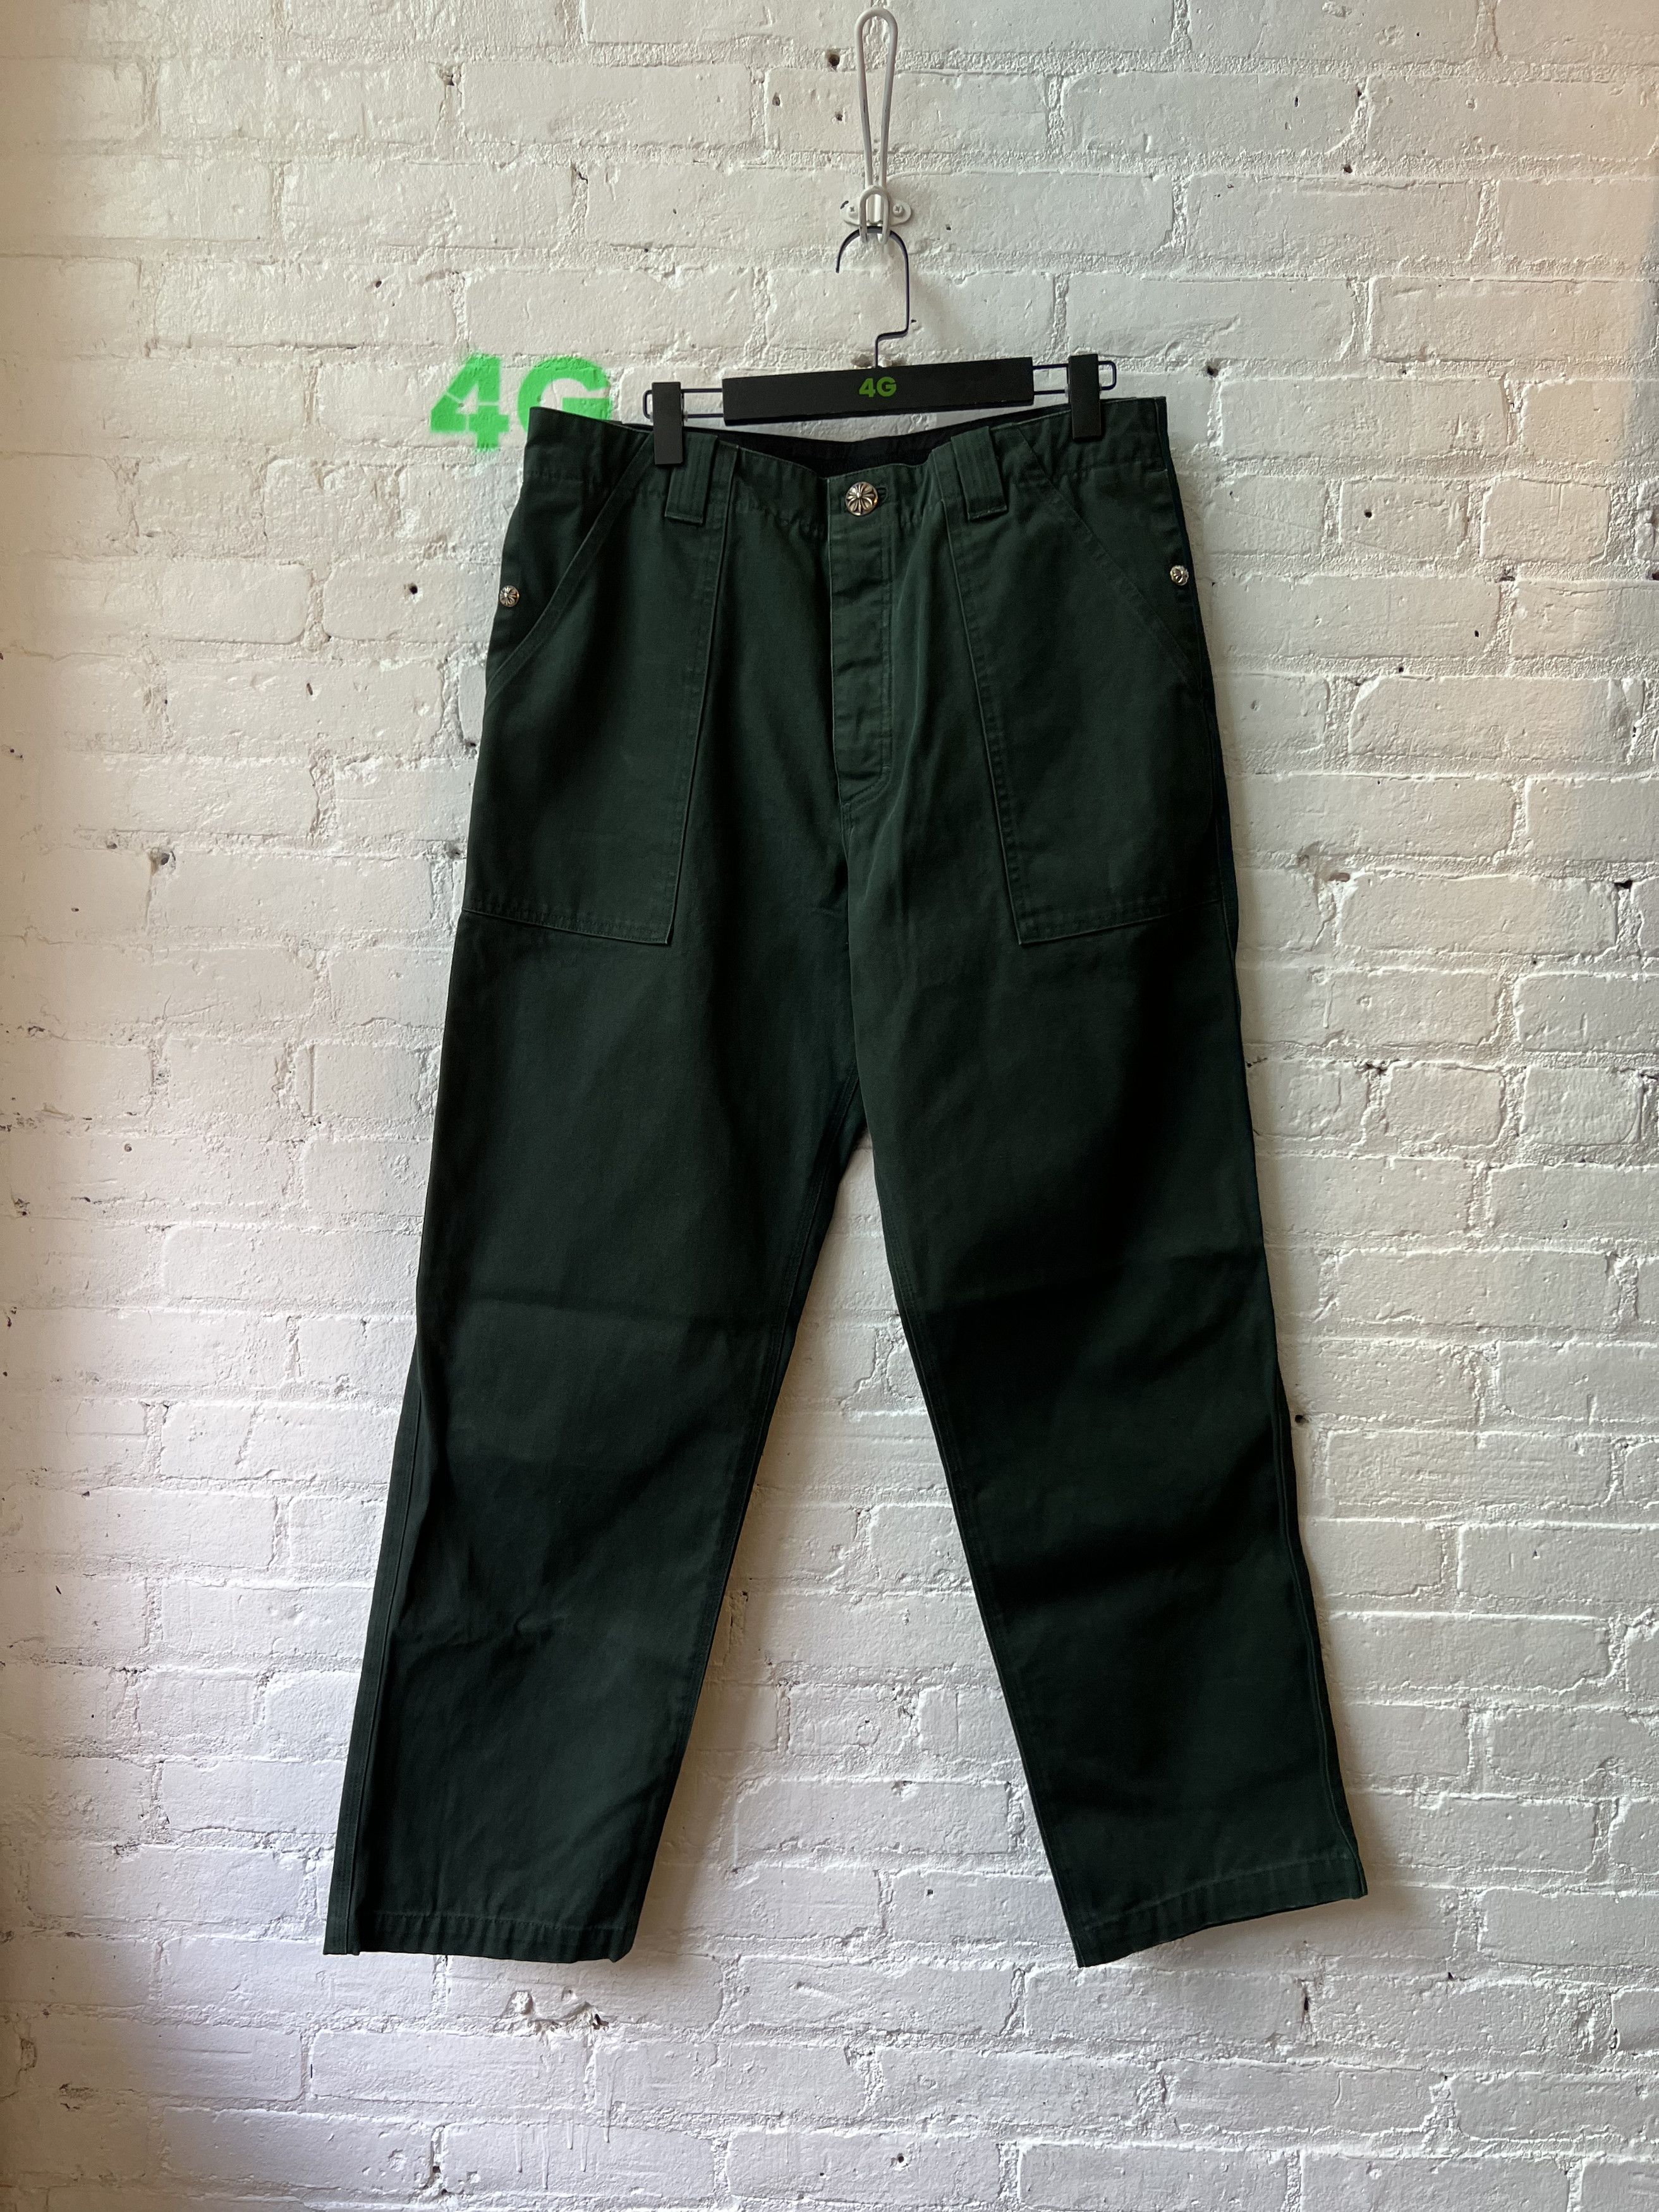 Pre-owned Chrome Hearts Green Army Fatigue Carpenter Pants